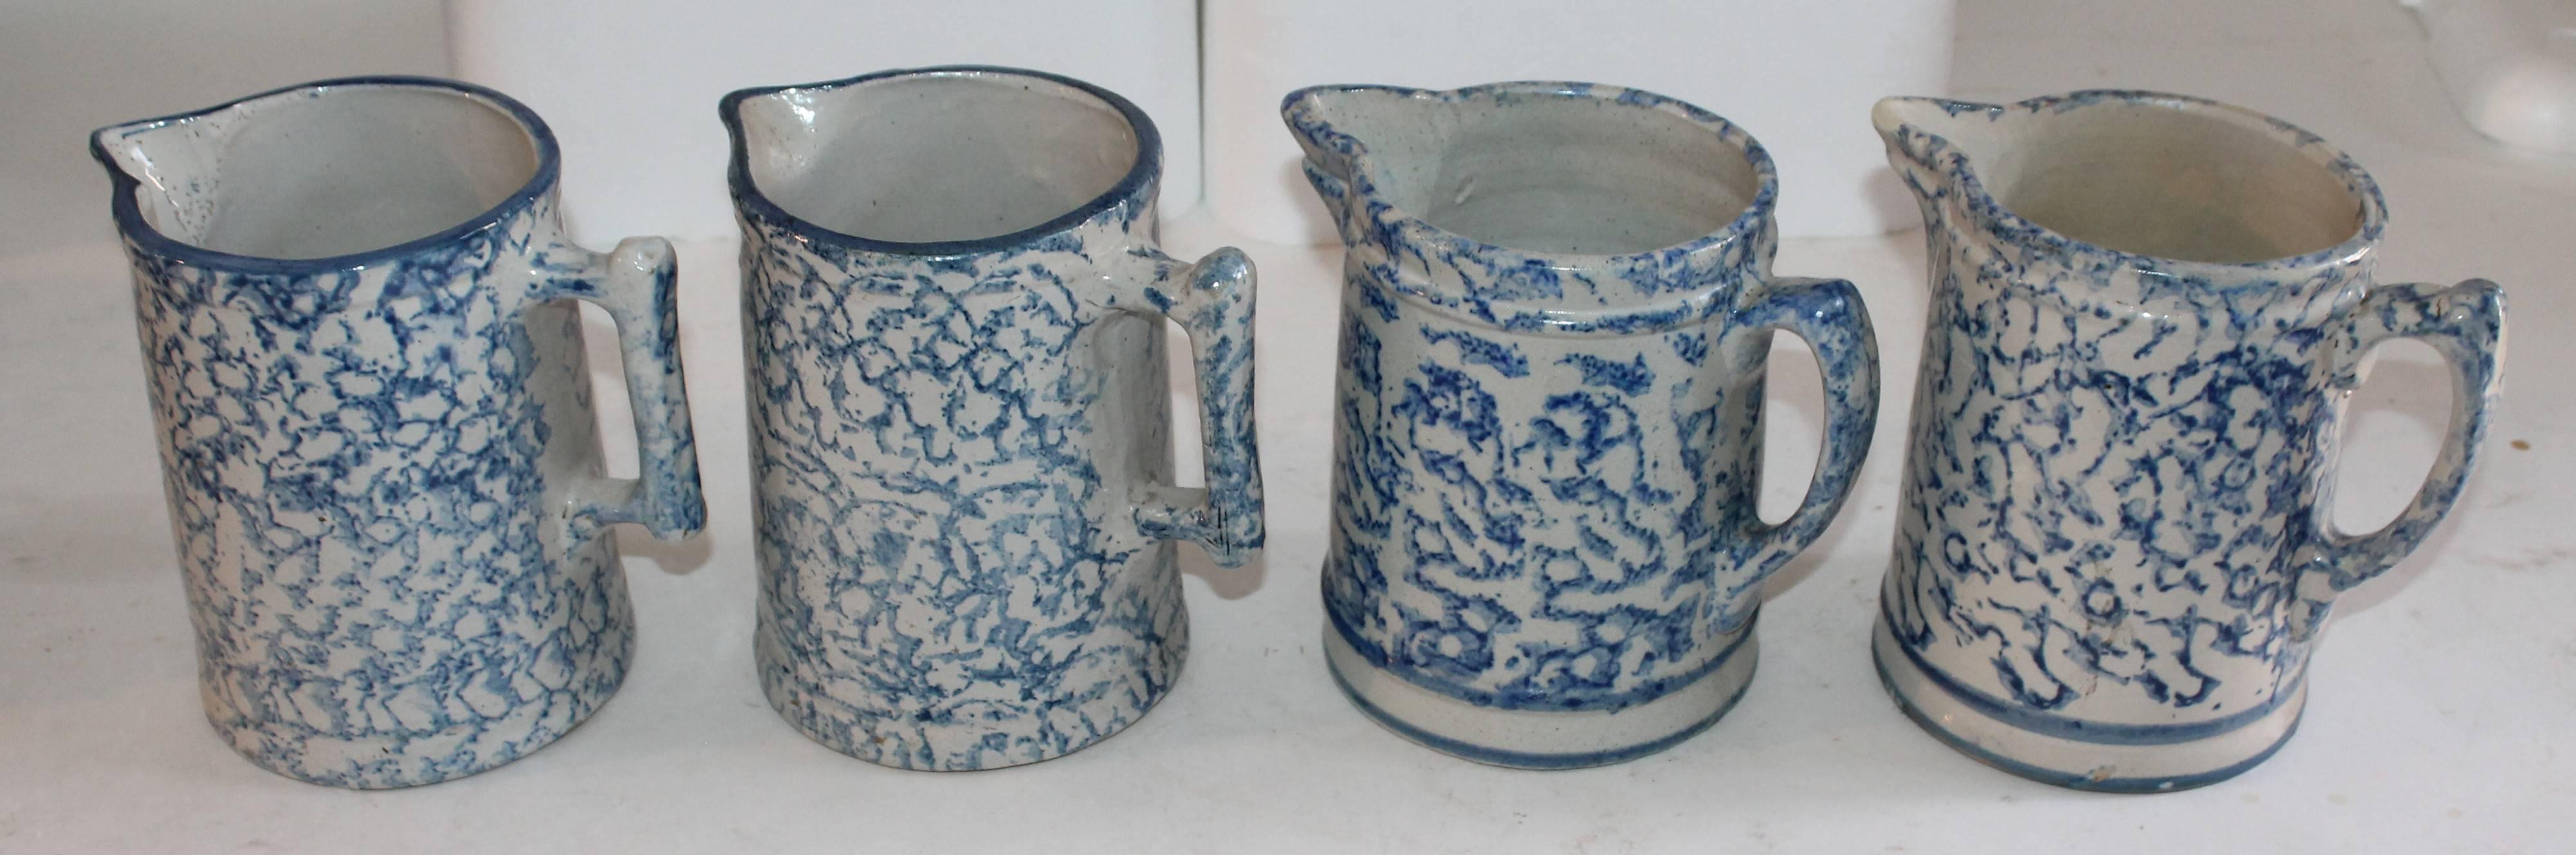 19th Century Sponge Ware Collection of Eight Pottery Pitchers 3